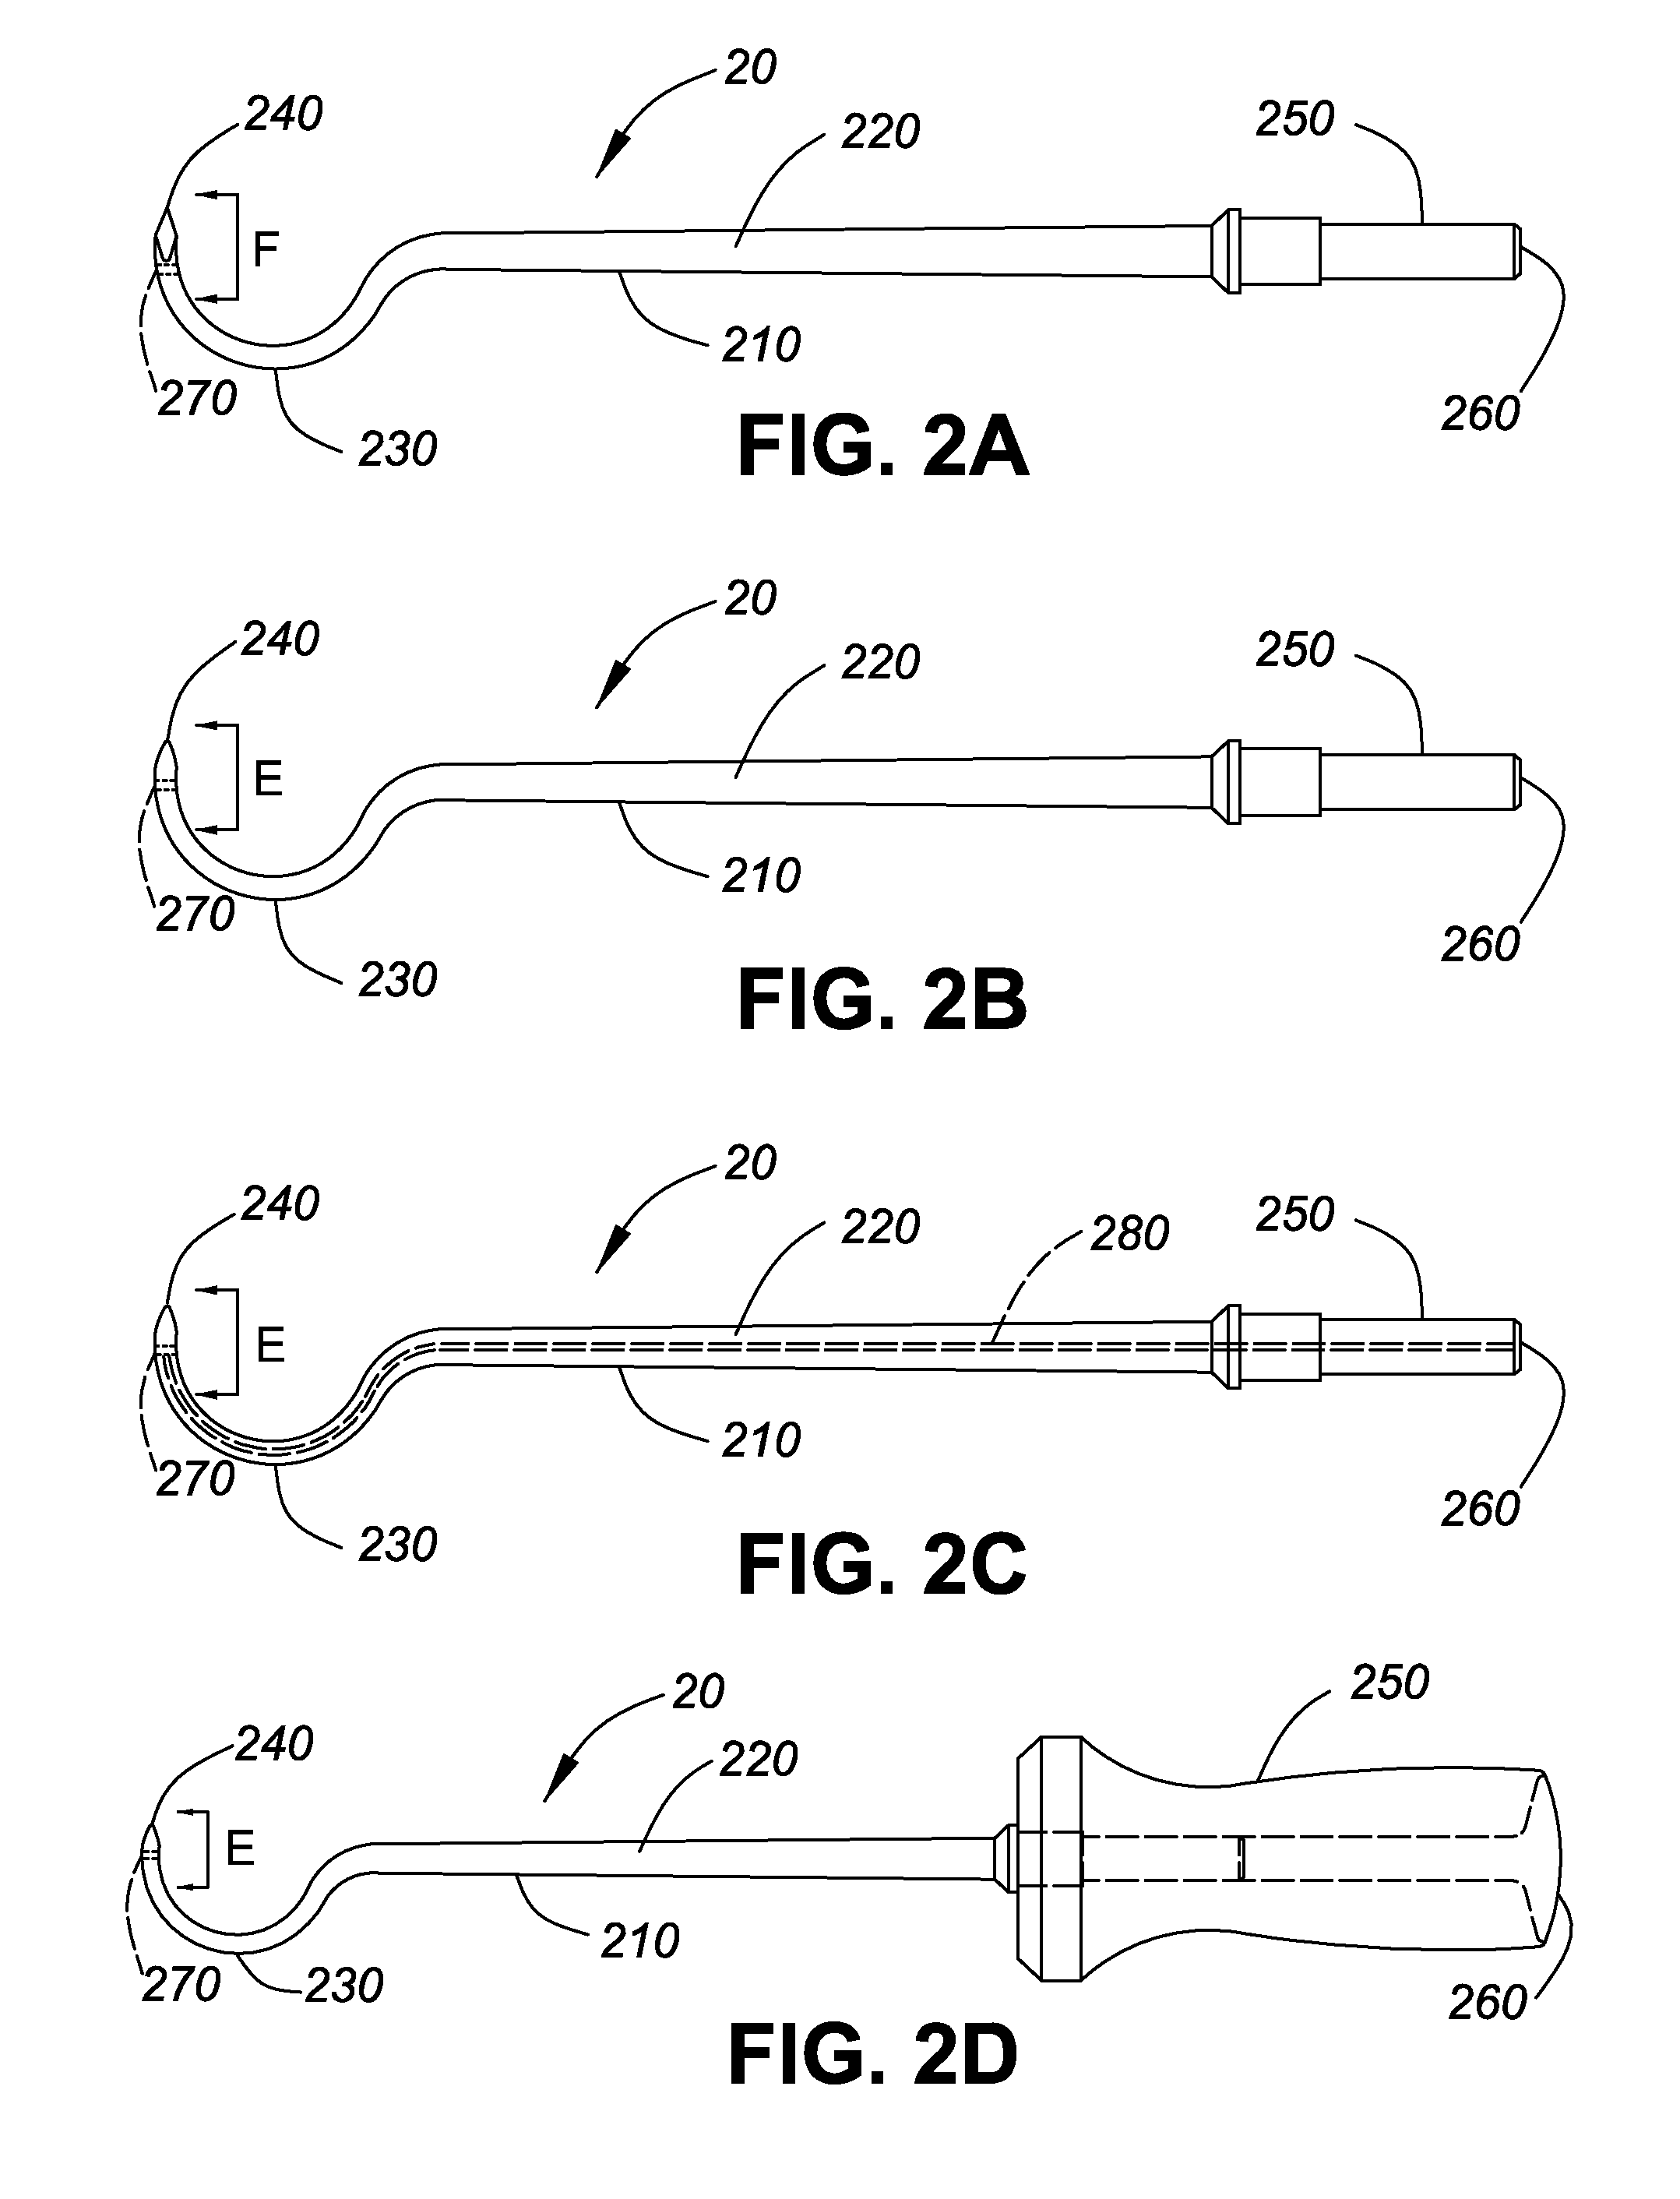 Method and apparatus for arthroscopic rotator cuff repair using transosseous tunnels